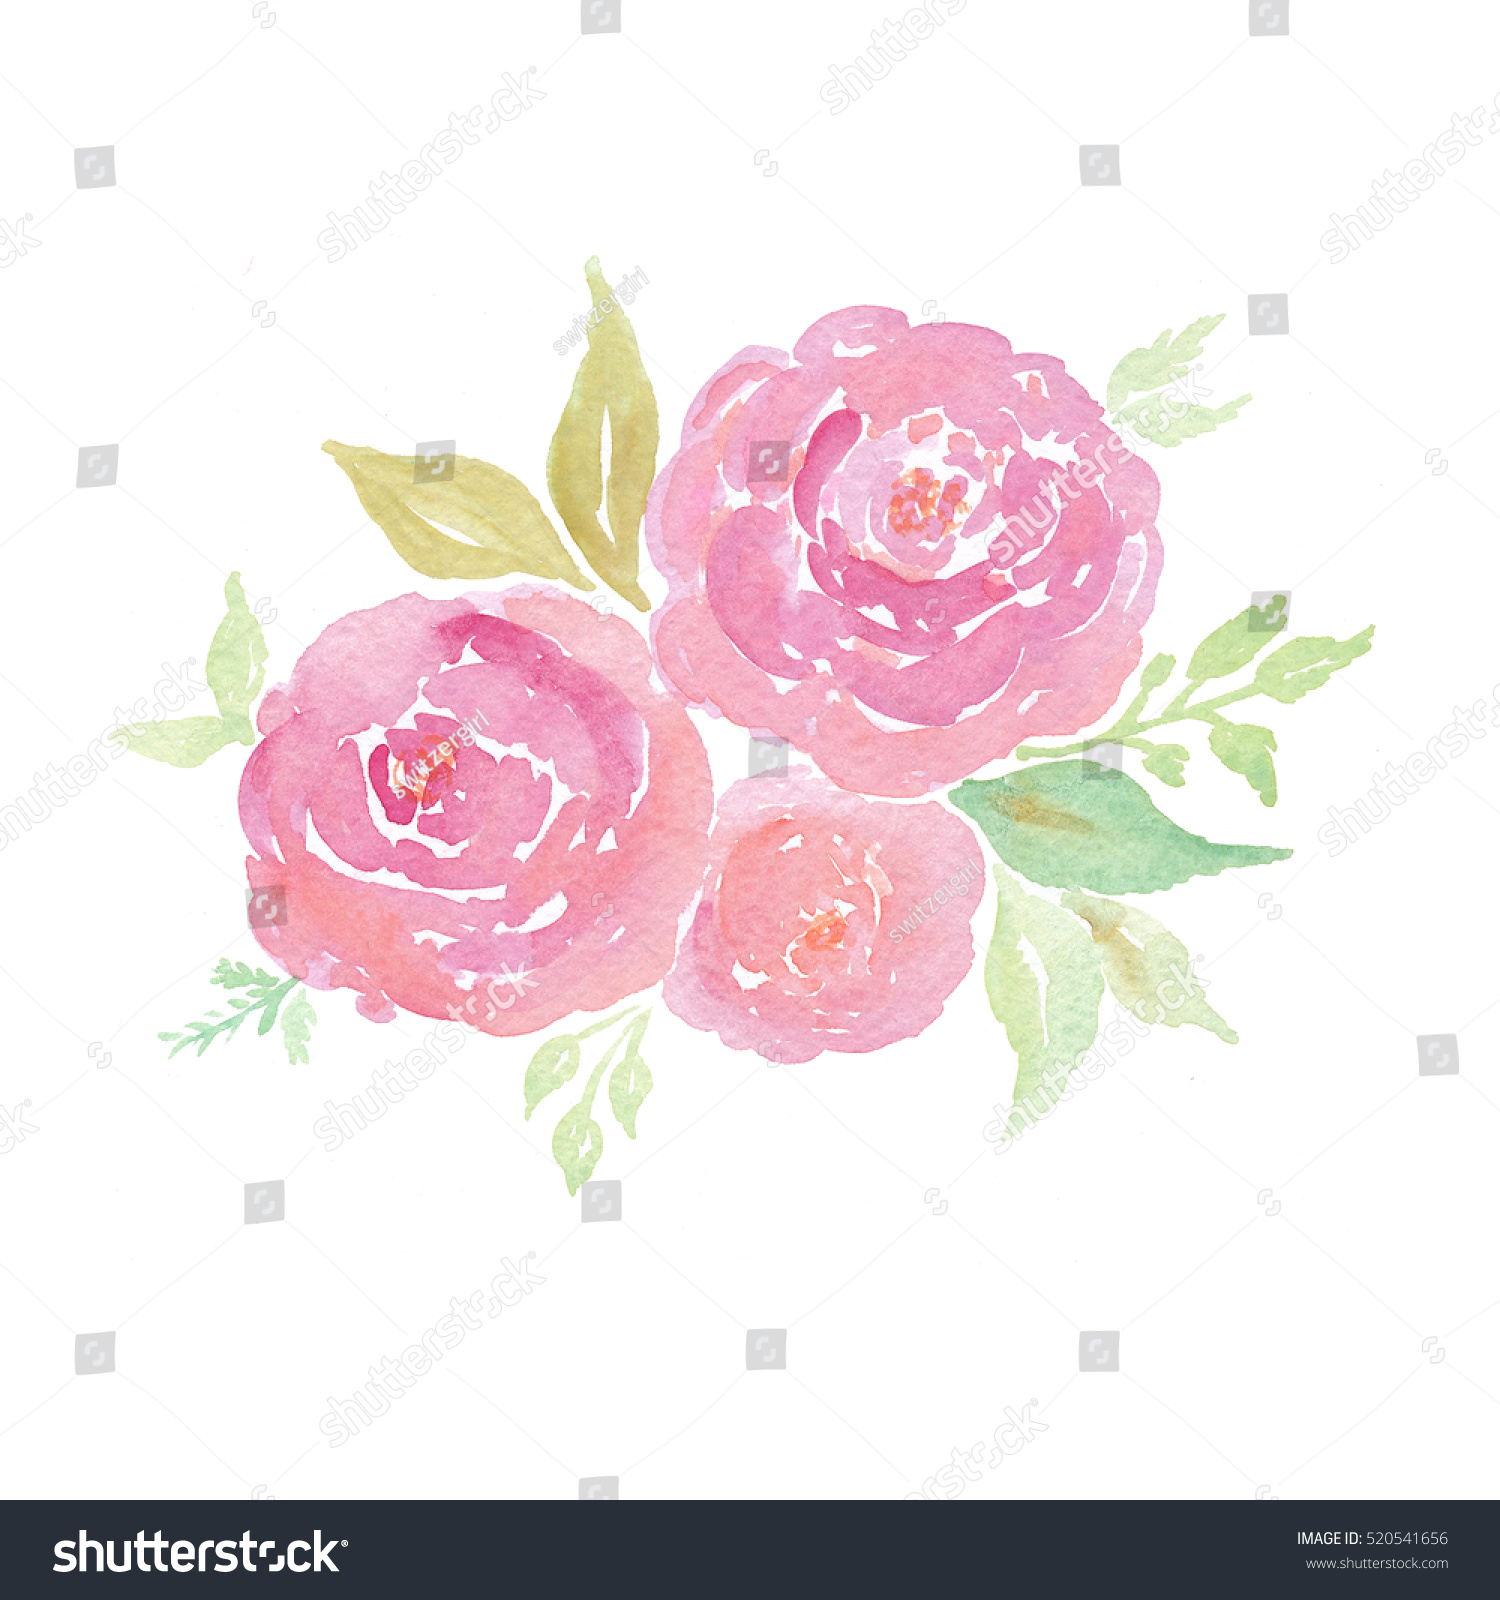 Download Handpainted Watercolor Flowers Clipart Watercolor Roses Stock Illustration 520541656